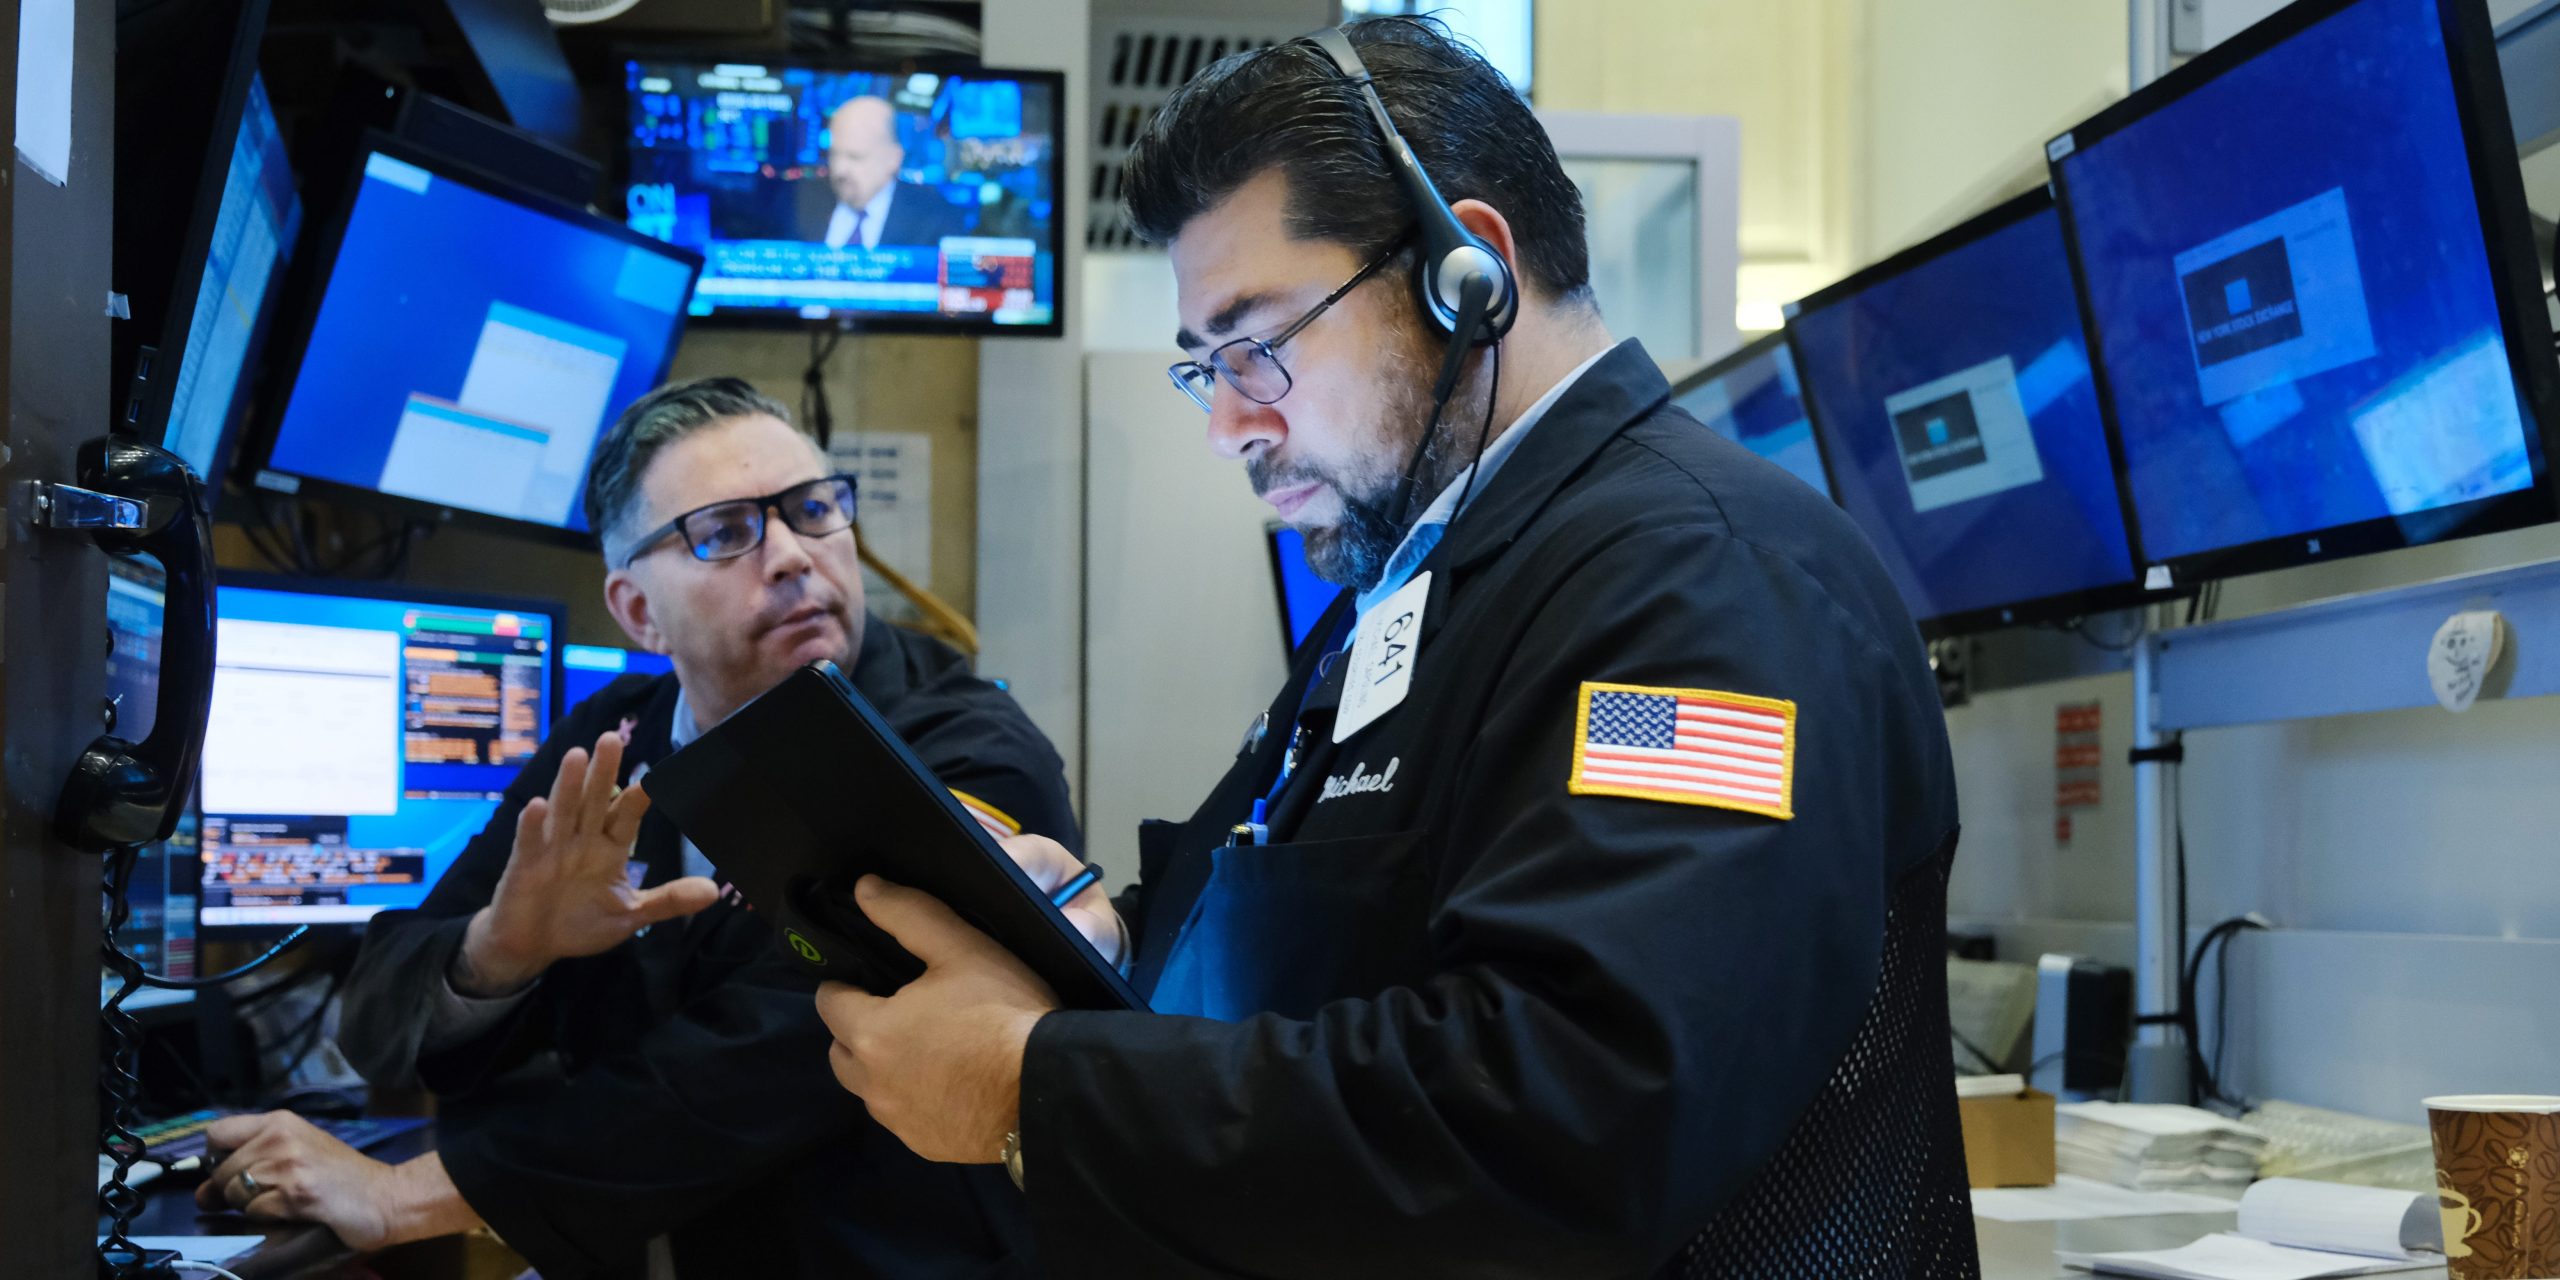 Traders work on the floor of the New York Stock Exchange on December 13, 2021 in New York City.